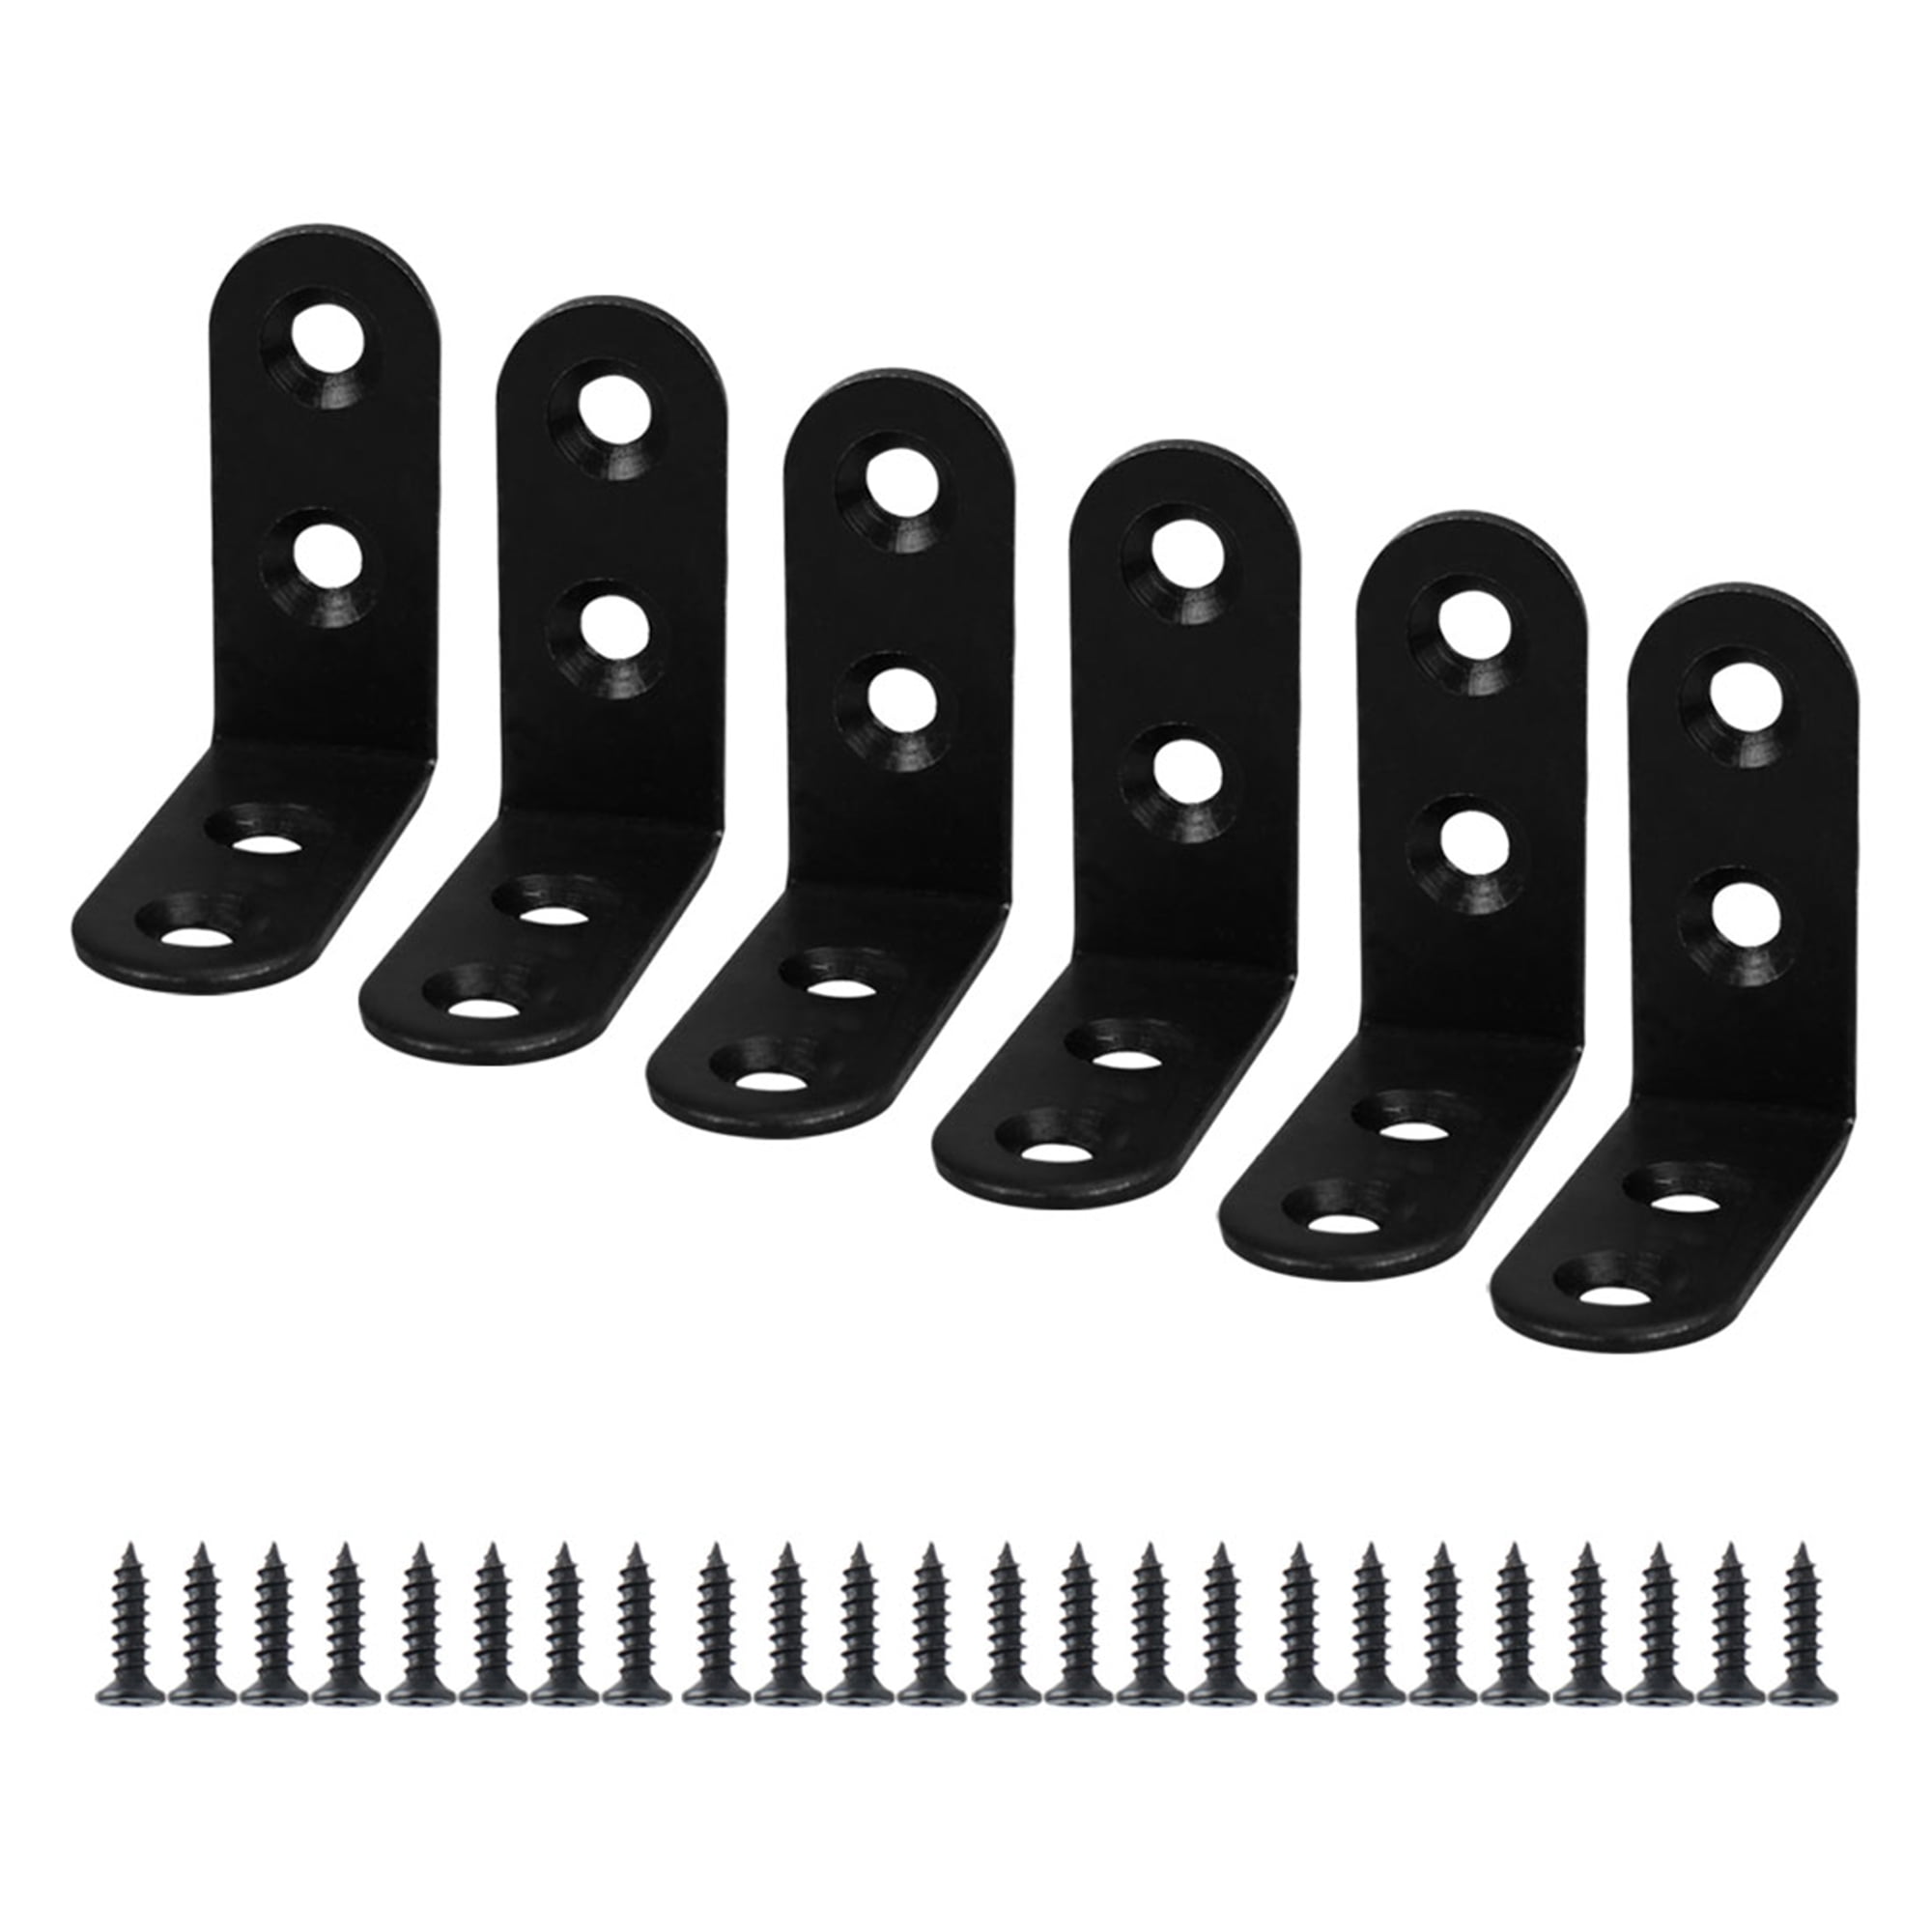 Corner Braces Brackets Plates Metal Steel Sheet Galvanised 20x20x16MM 20 Pieces Heavy Duty Wooden Angle Connector Beading Brackets